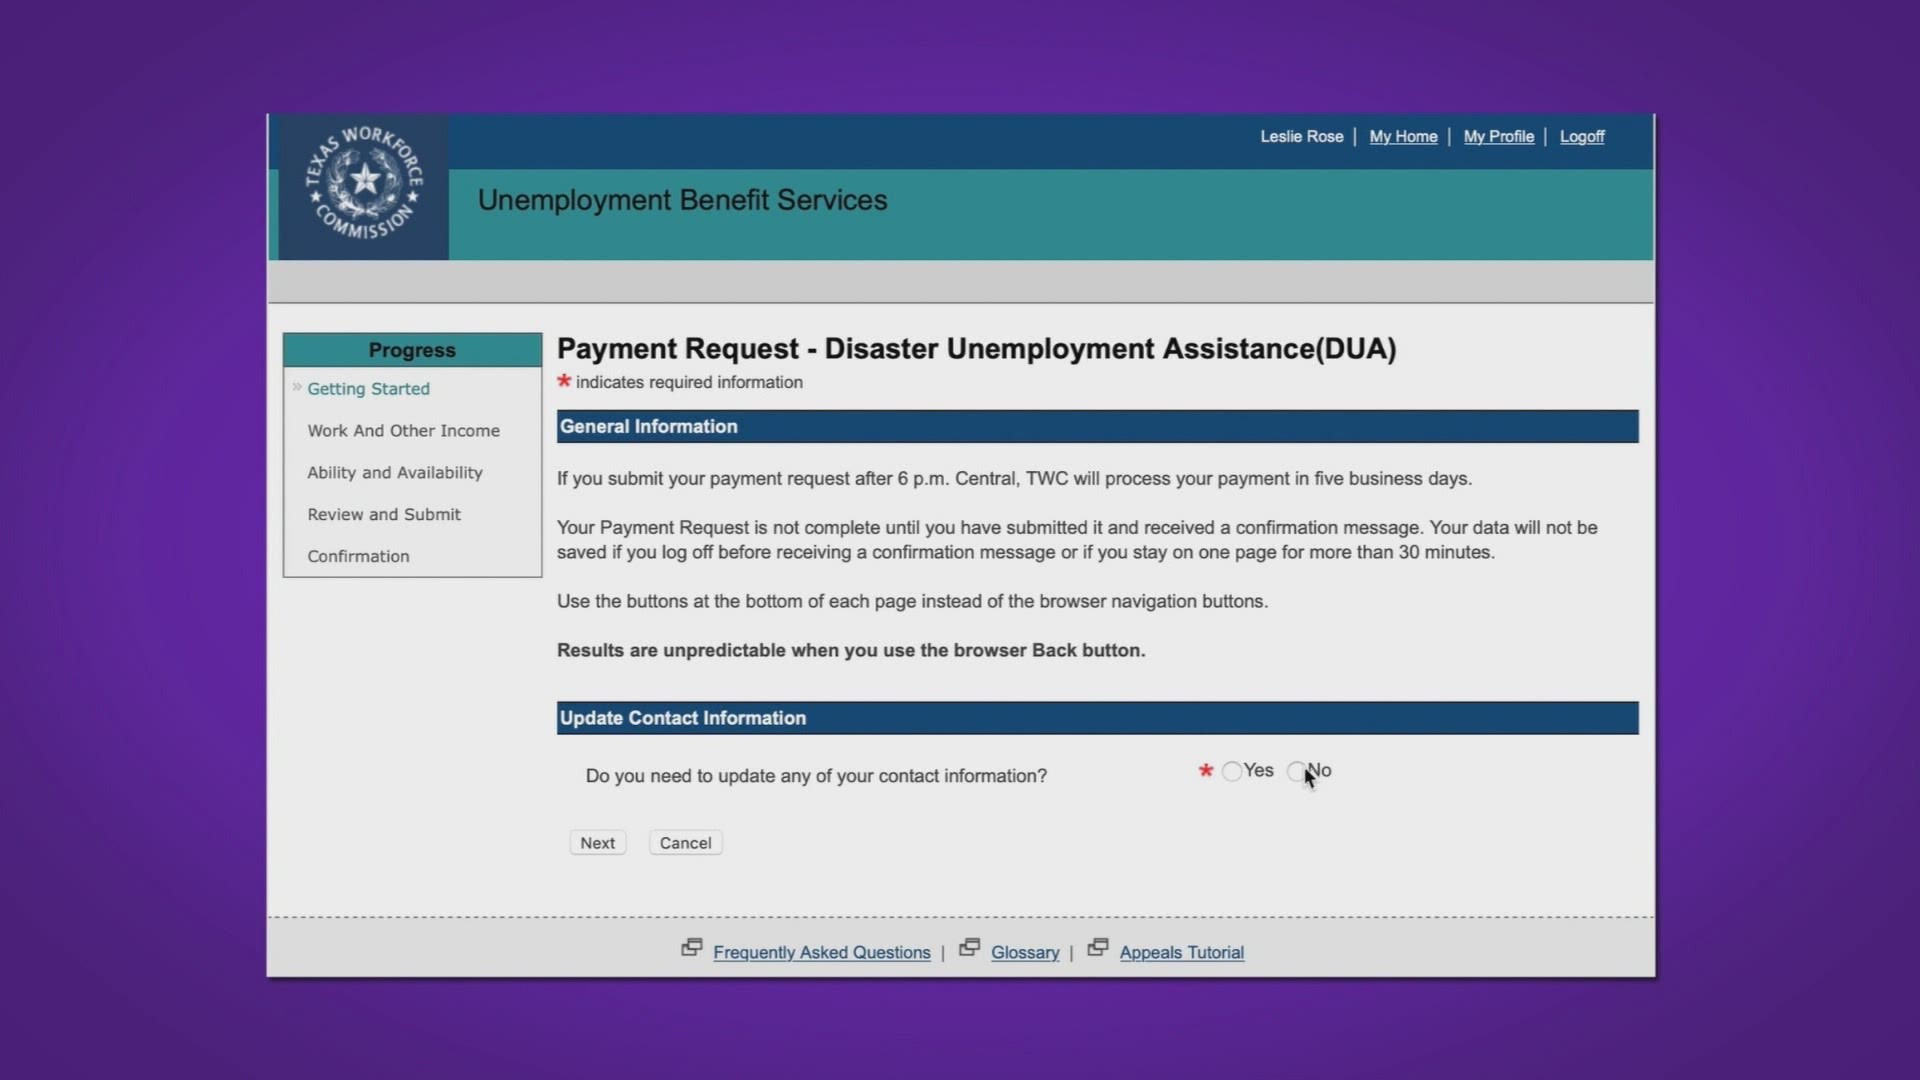 Having issues with unemployment payments? The IRS "Get My Payment" tool not working? Wondering about payments for your children? We have answers.